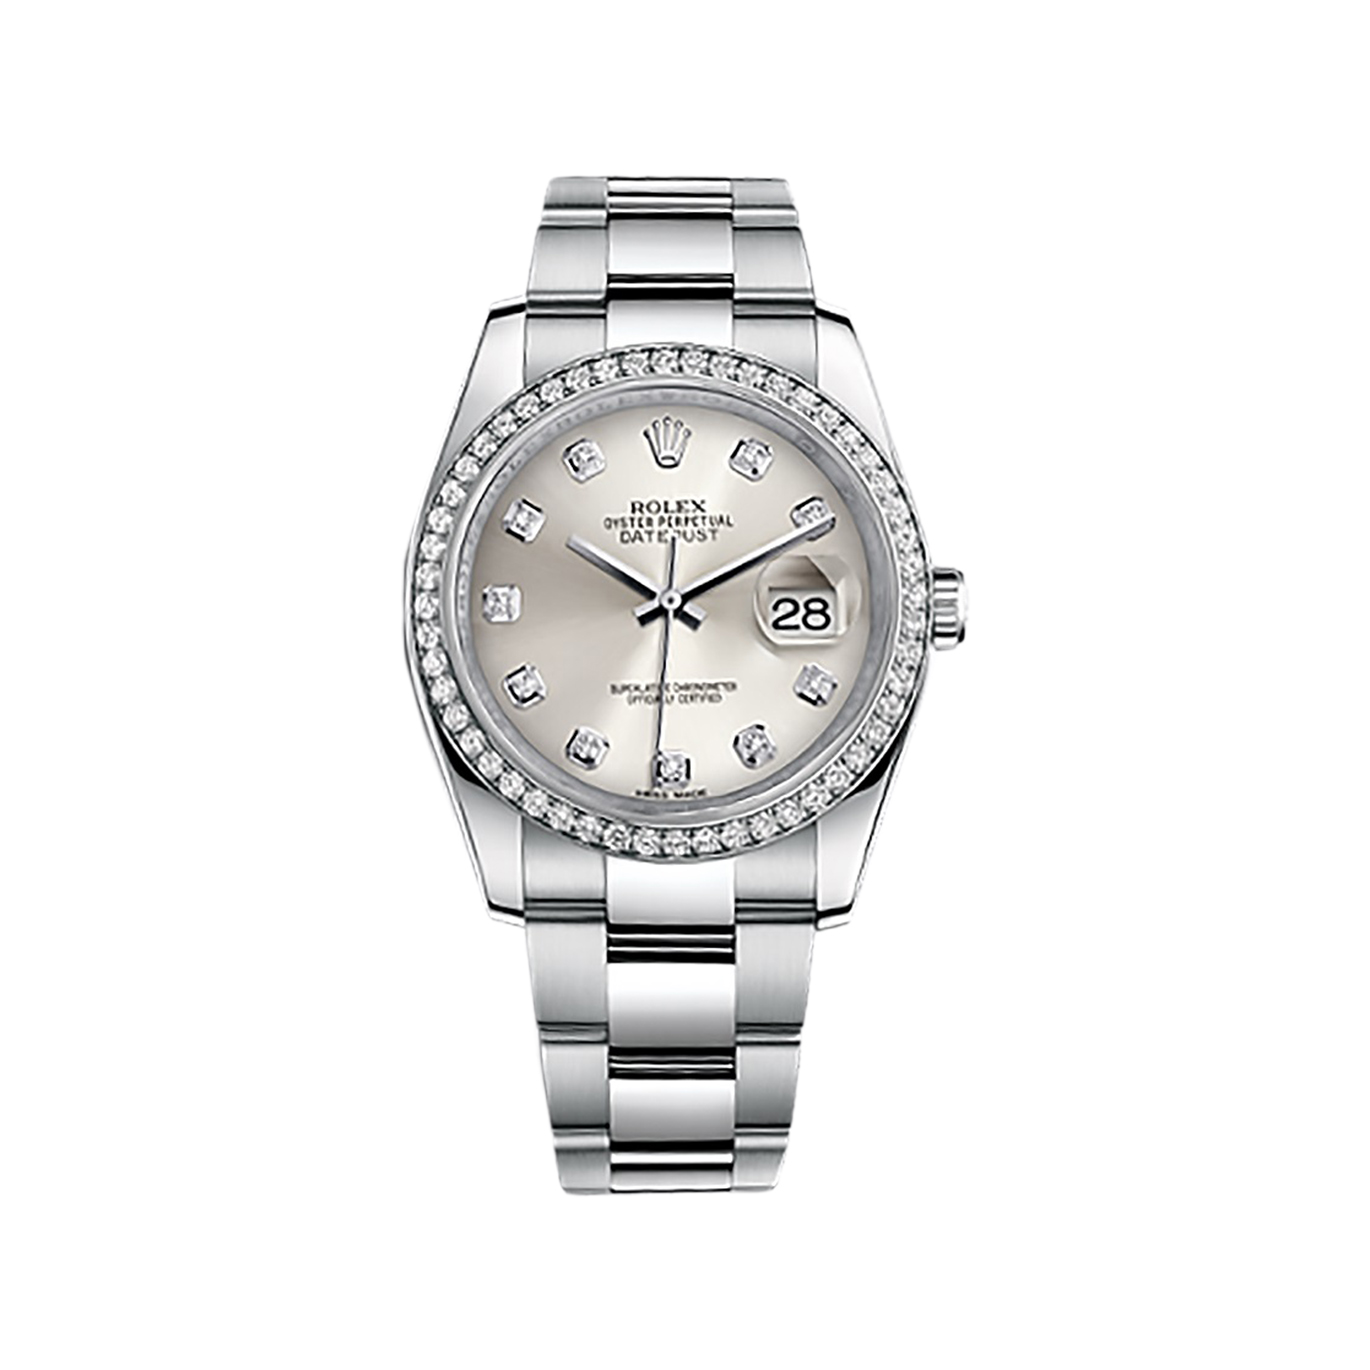 Datejust 36 116244 White Gold & Stainless Steel Watch (Silver Set with Diamonds)